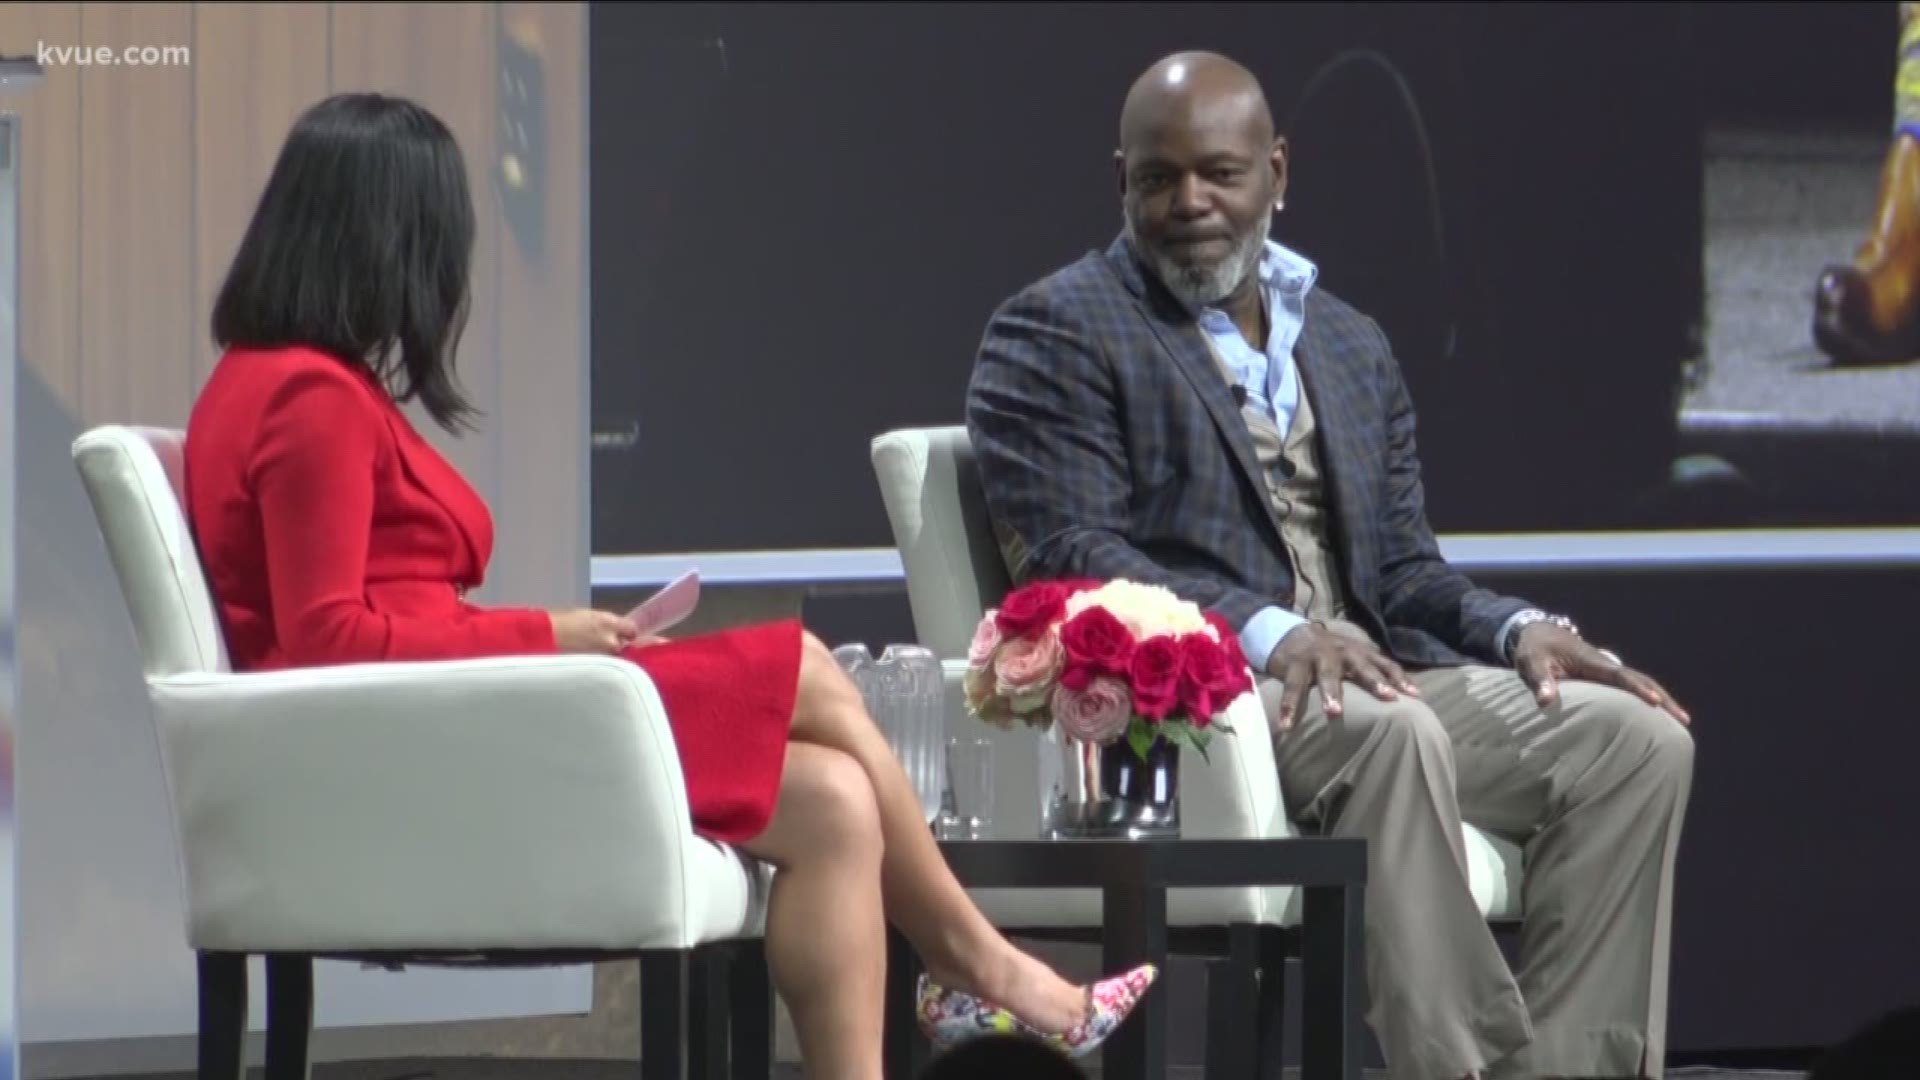 During a conference in Austin Monday, former Dallas Cowboys running back Emmitt Smith opened up about his transition from an athlete to an entrepreneur.